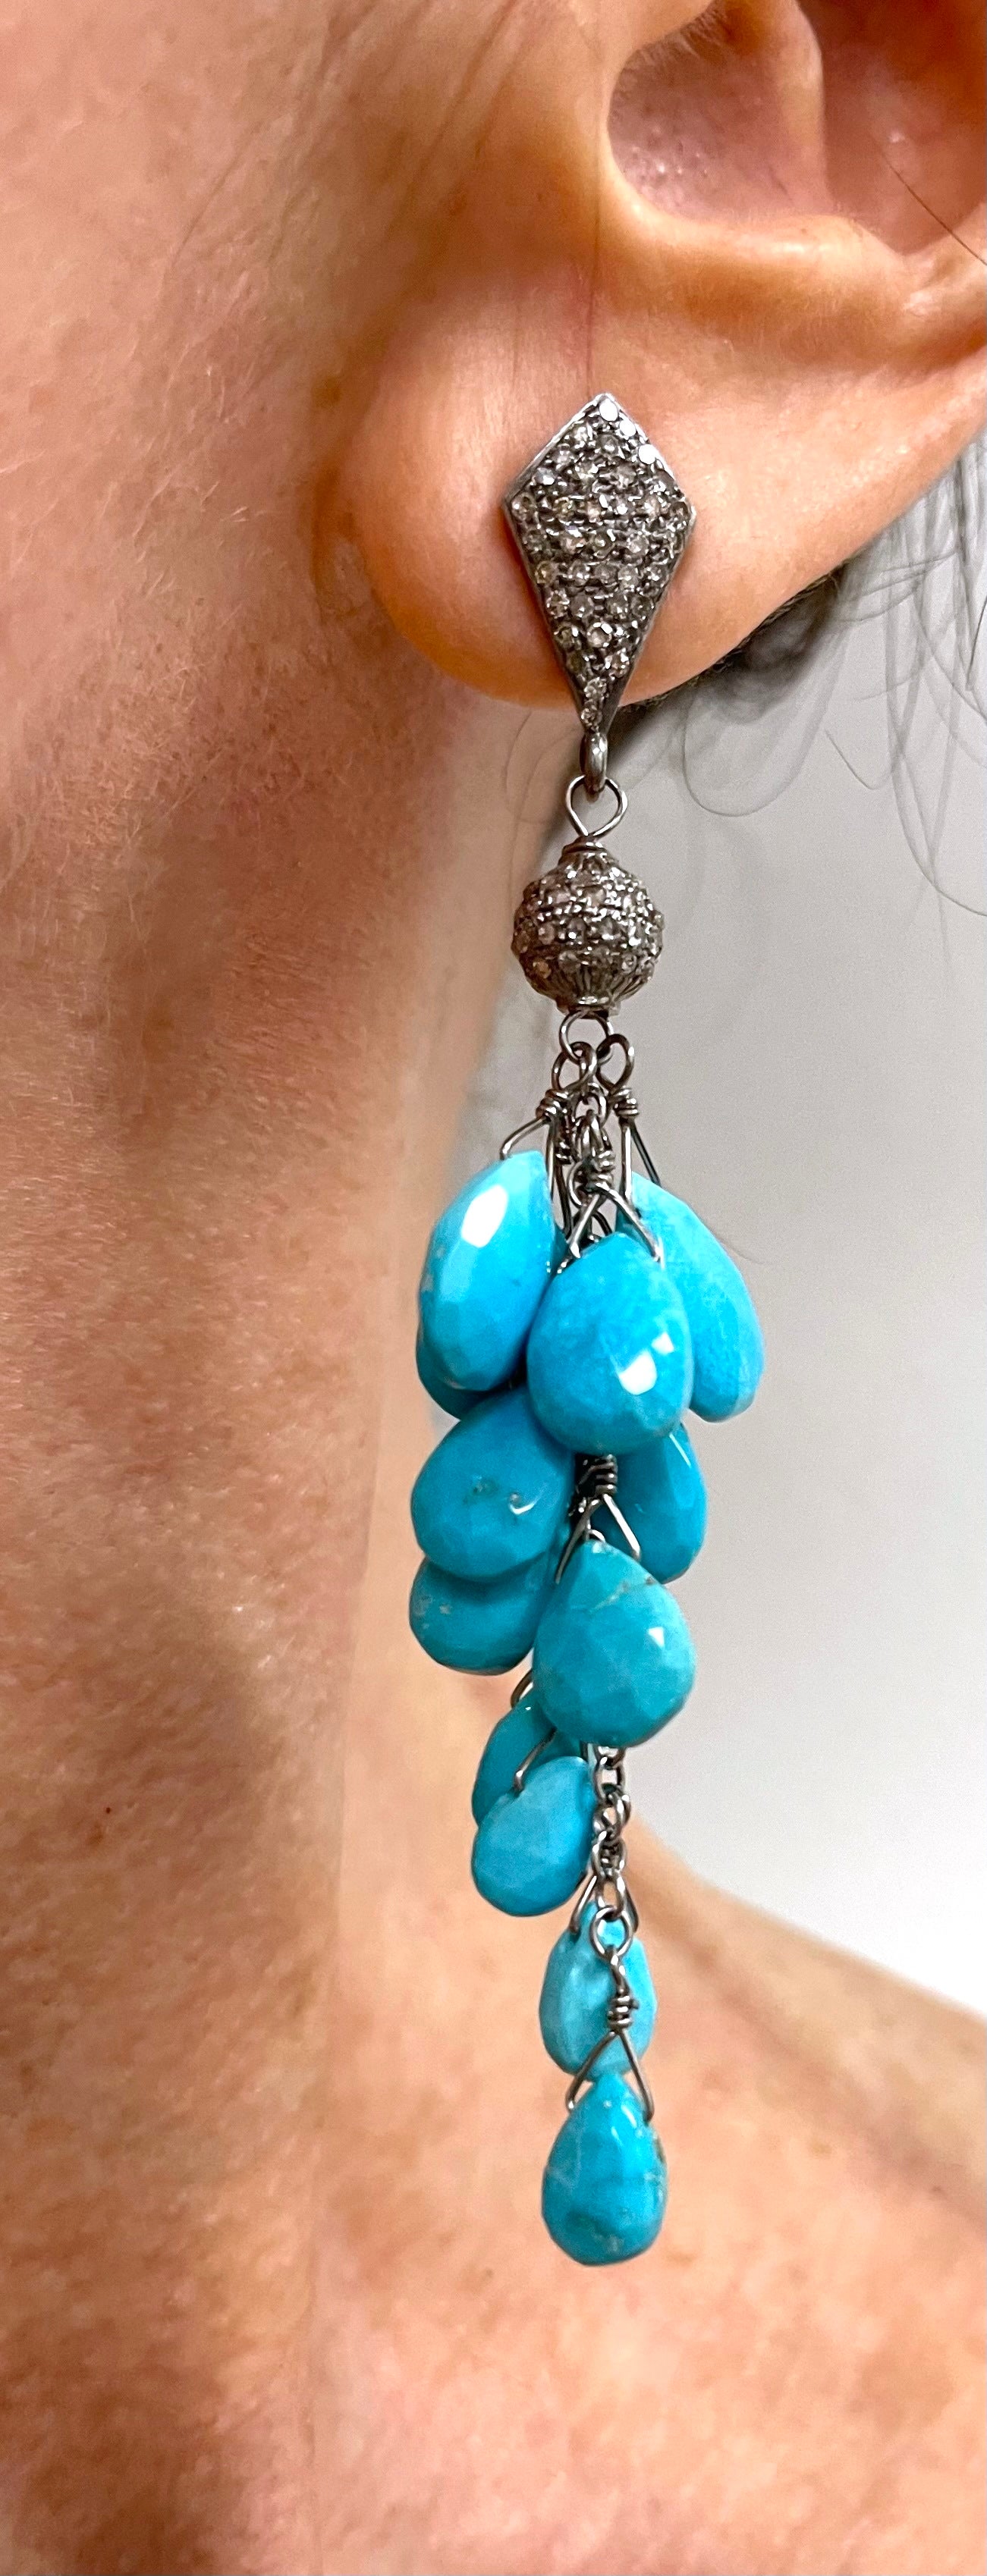 Description
Vivid and strikingly beautiful Sleeping Beauty turquoise, individually wire wrapped creating a cascading cluster, crowned with pave diamond studs for an overall harmonious and feminine style.
Item # E3357

Materials and Weight
Sleeping